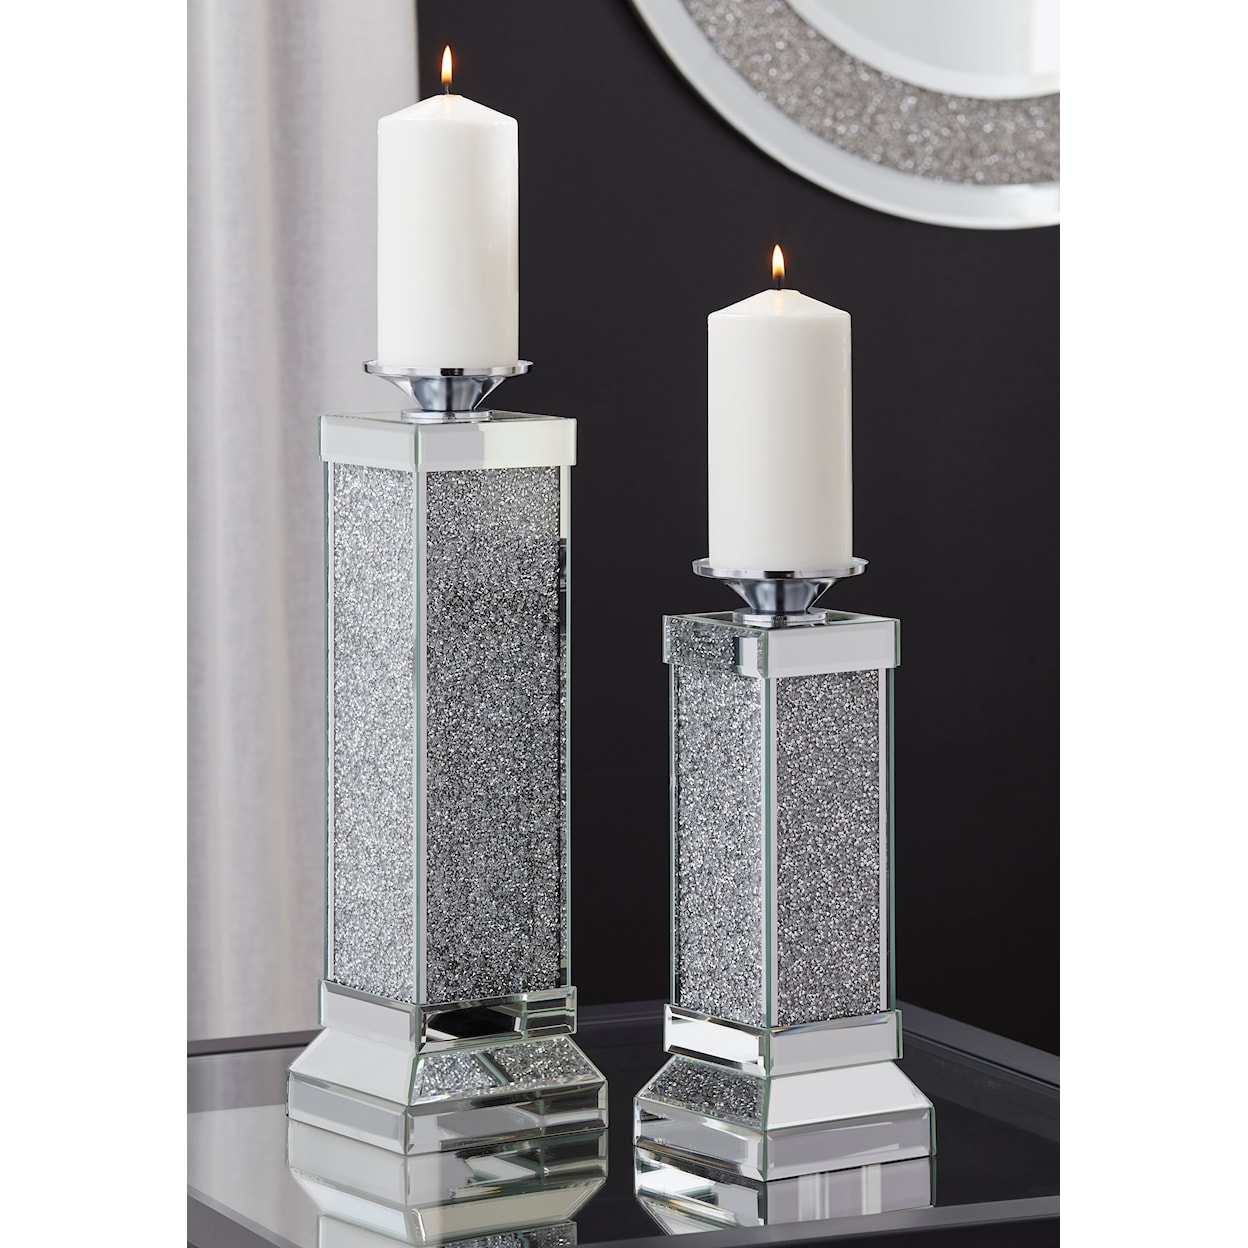 Signature Accents Charline Candle Holder (Set of 2)